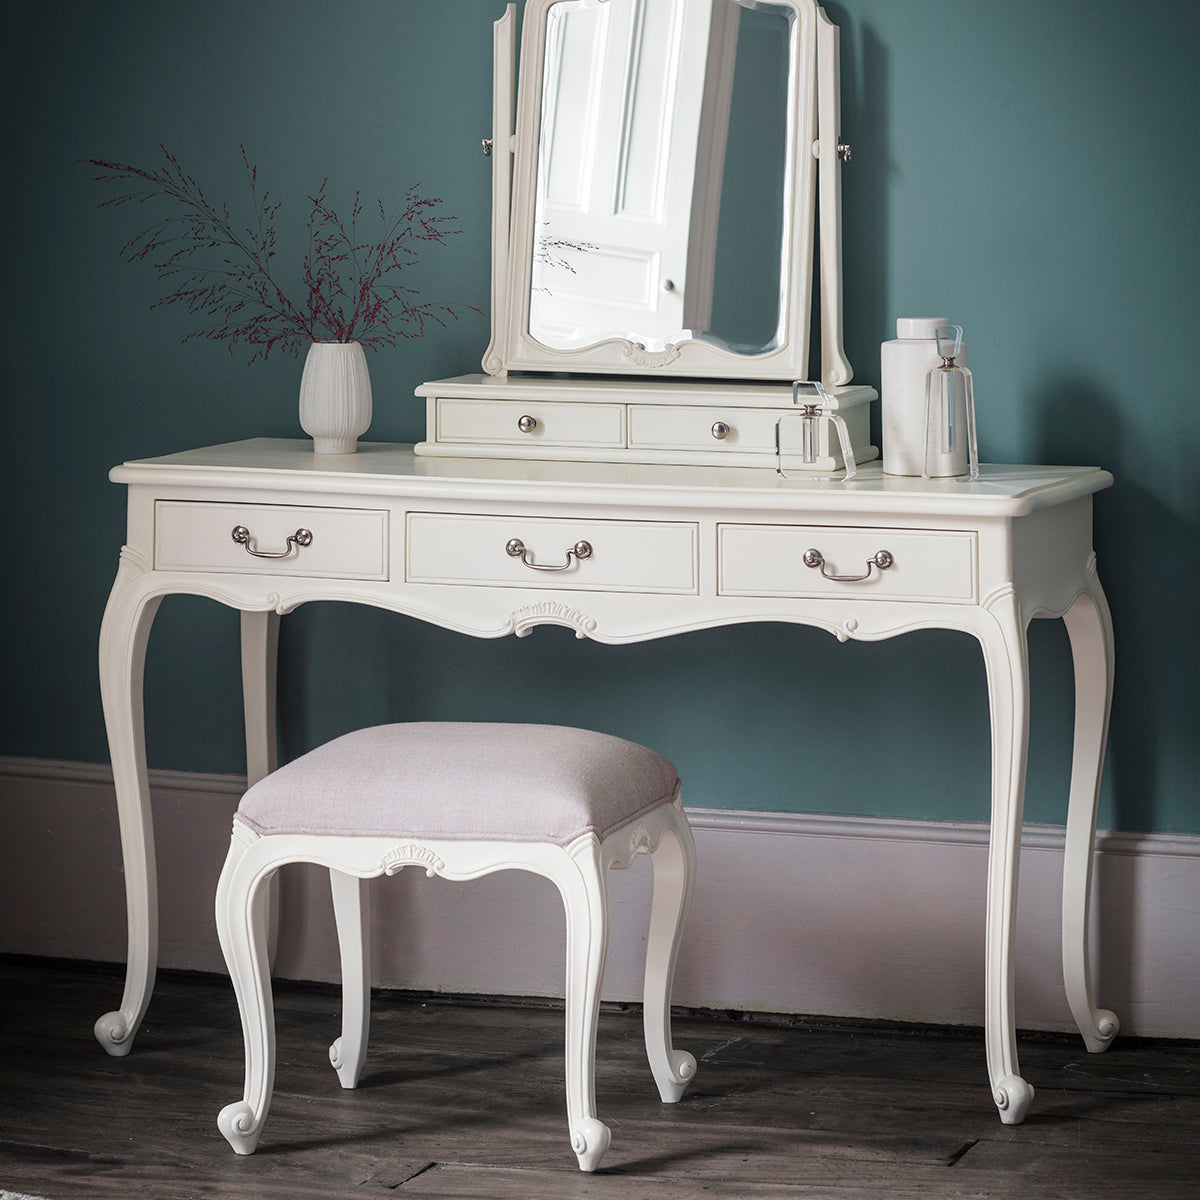 Load image into Gallery viewer, A Holne Dressing Table Vanilla White 1260x450x760mm with a mirror and stool for interior decor or home furniture from Kikiathome.co.uk.
